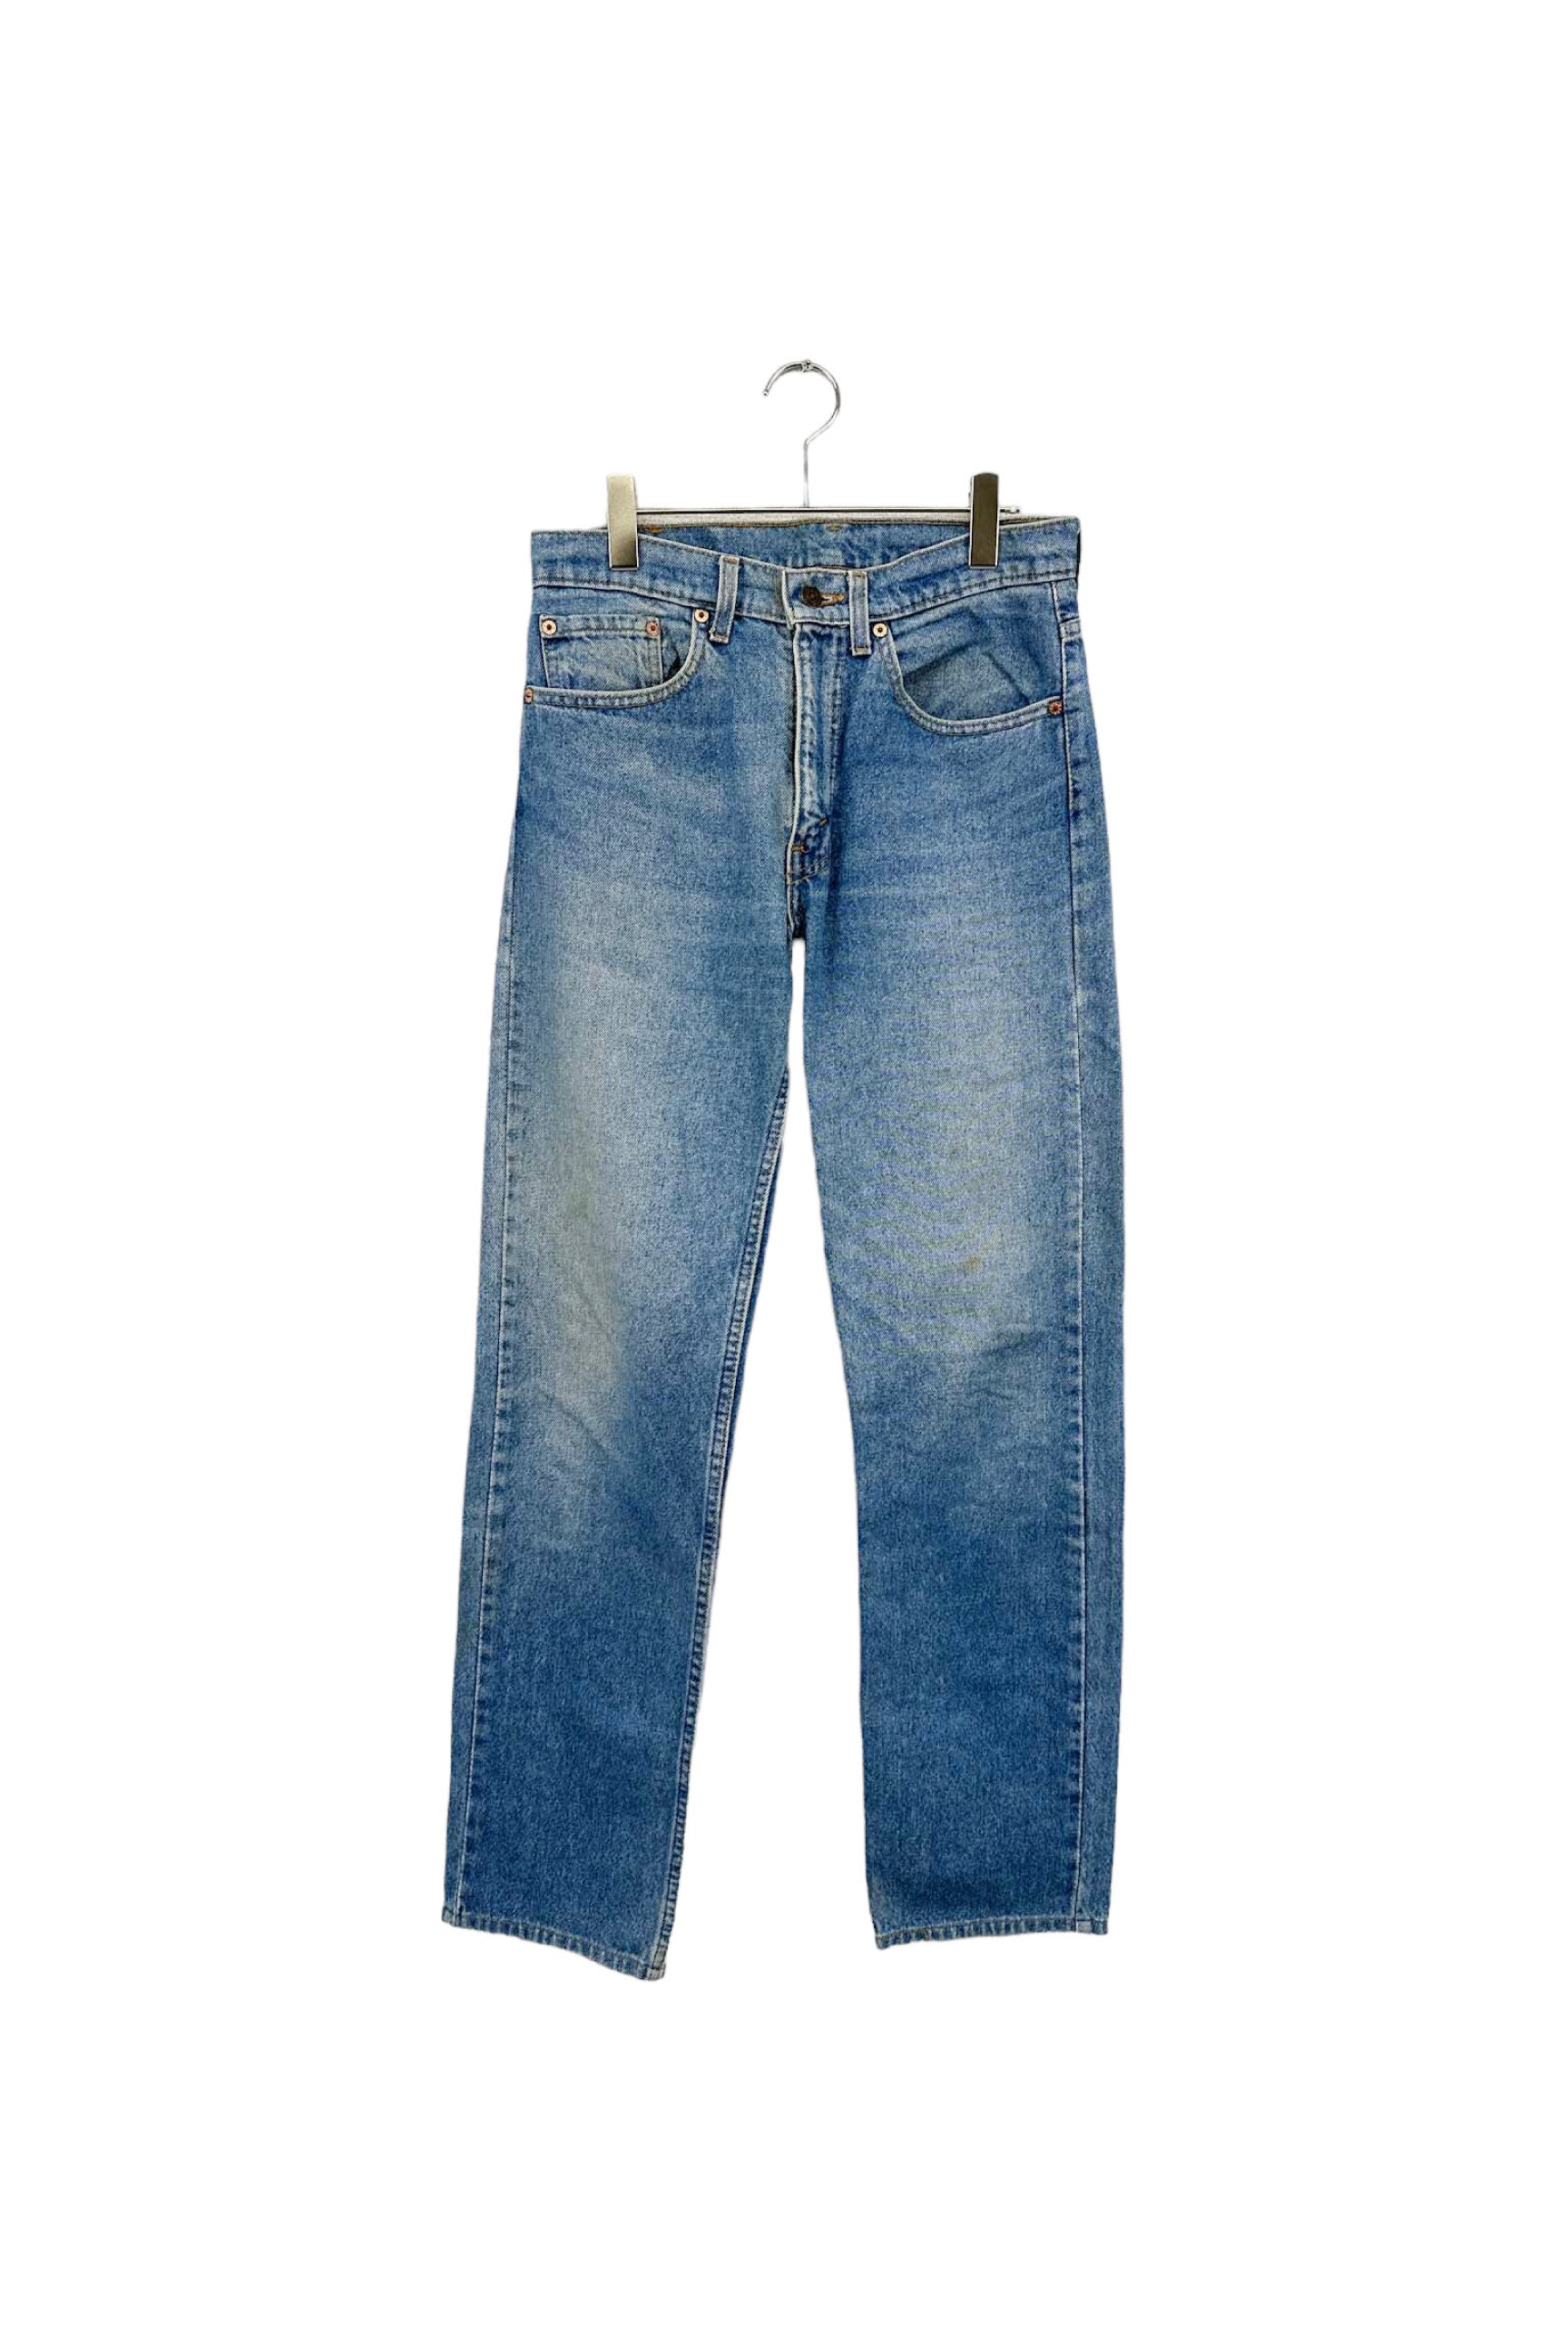 90's Made in USA Levi's 505-0217 denim pants – ReSCOUNT STORE